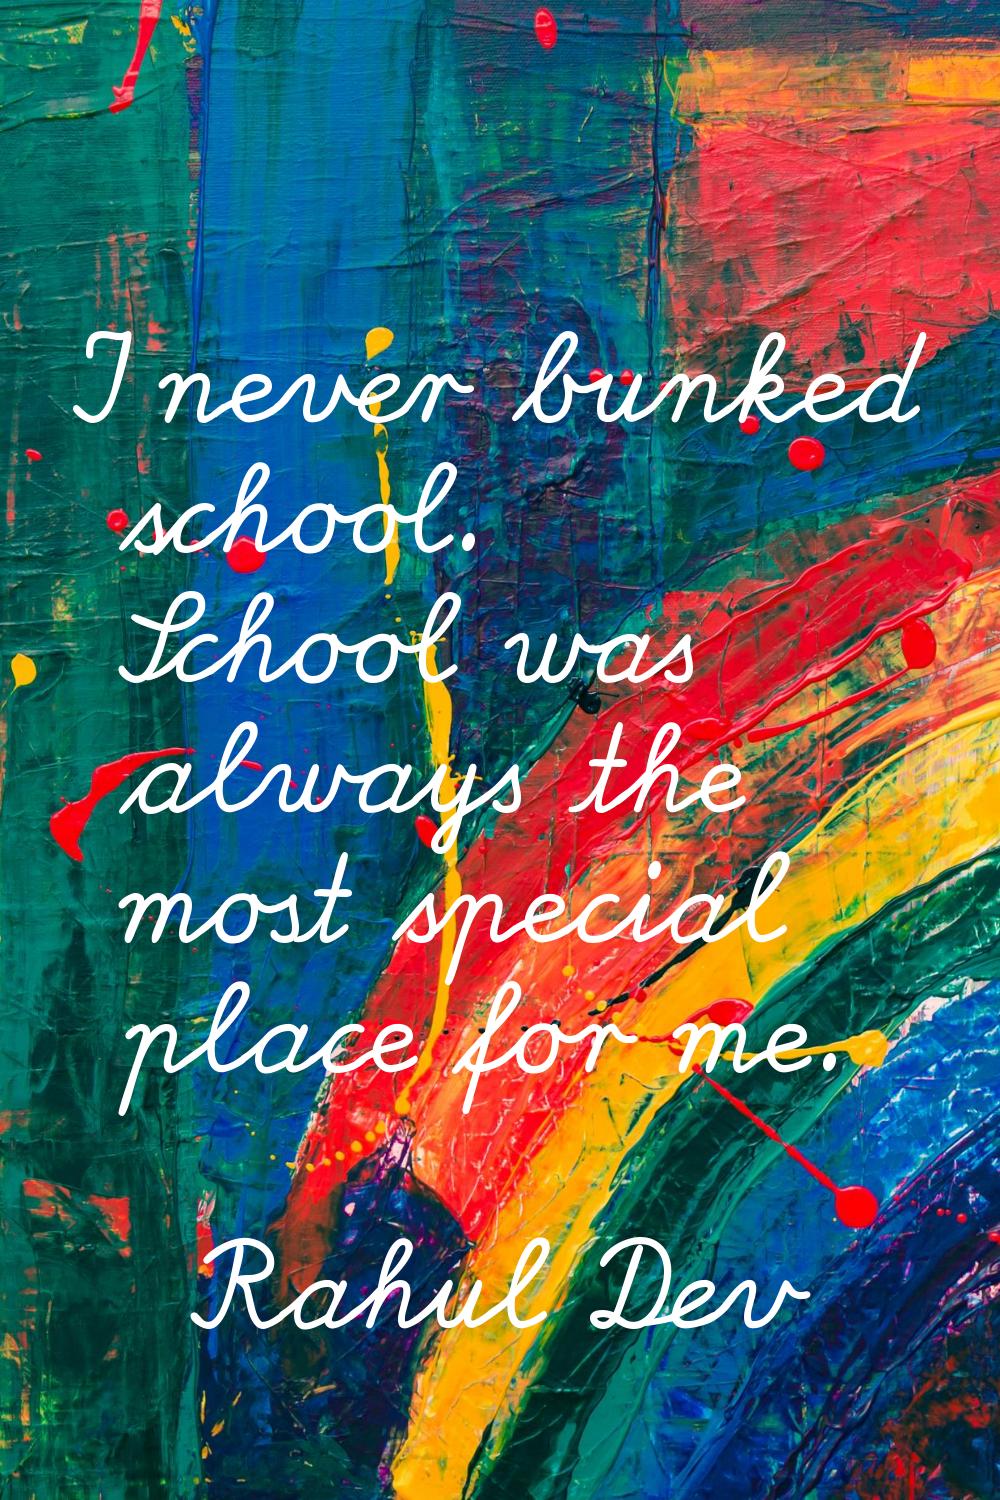 I never bunked school. School was always the most special place for me.